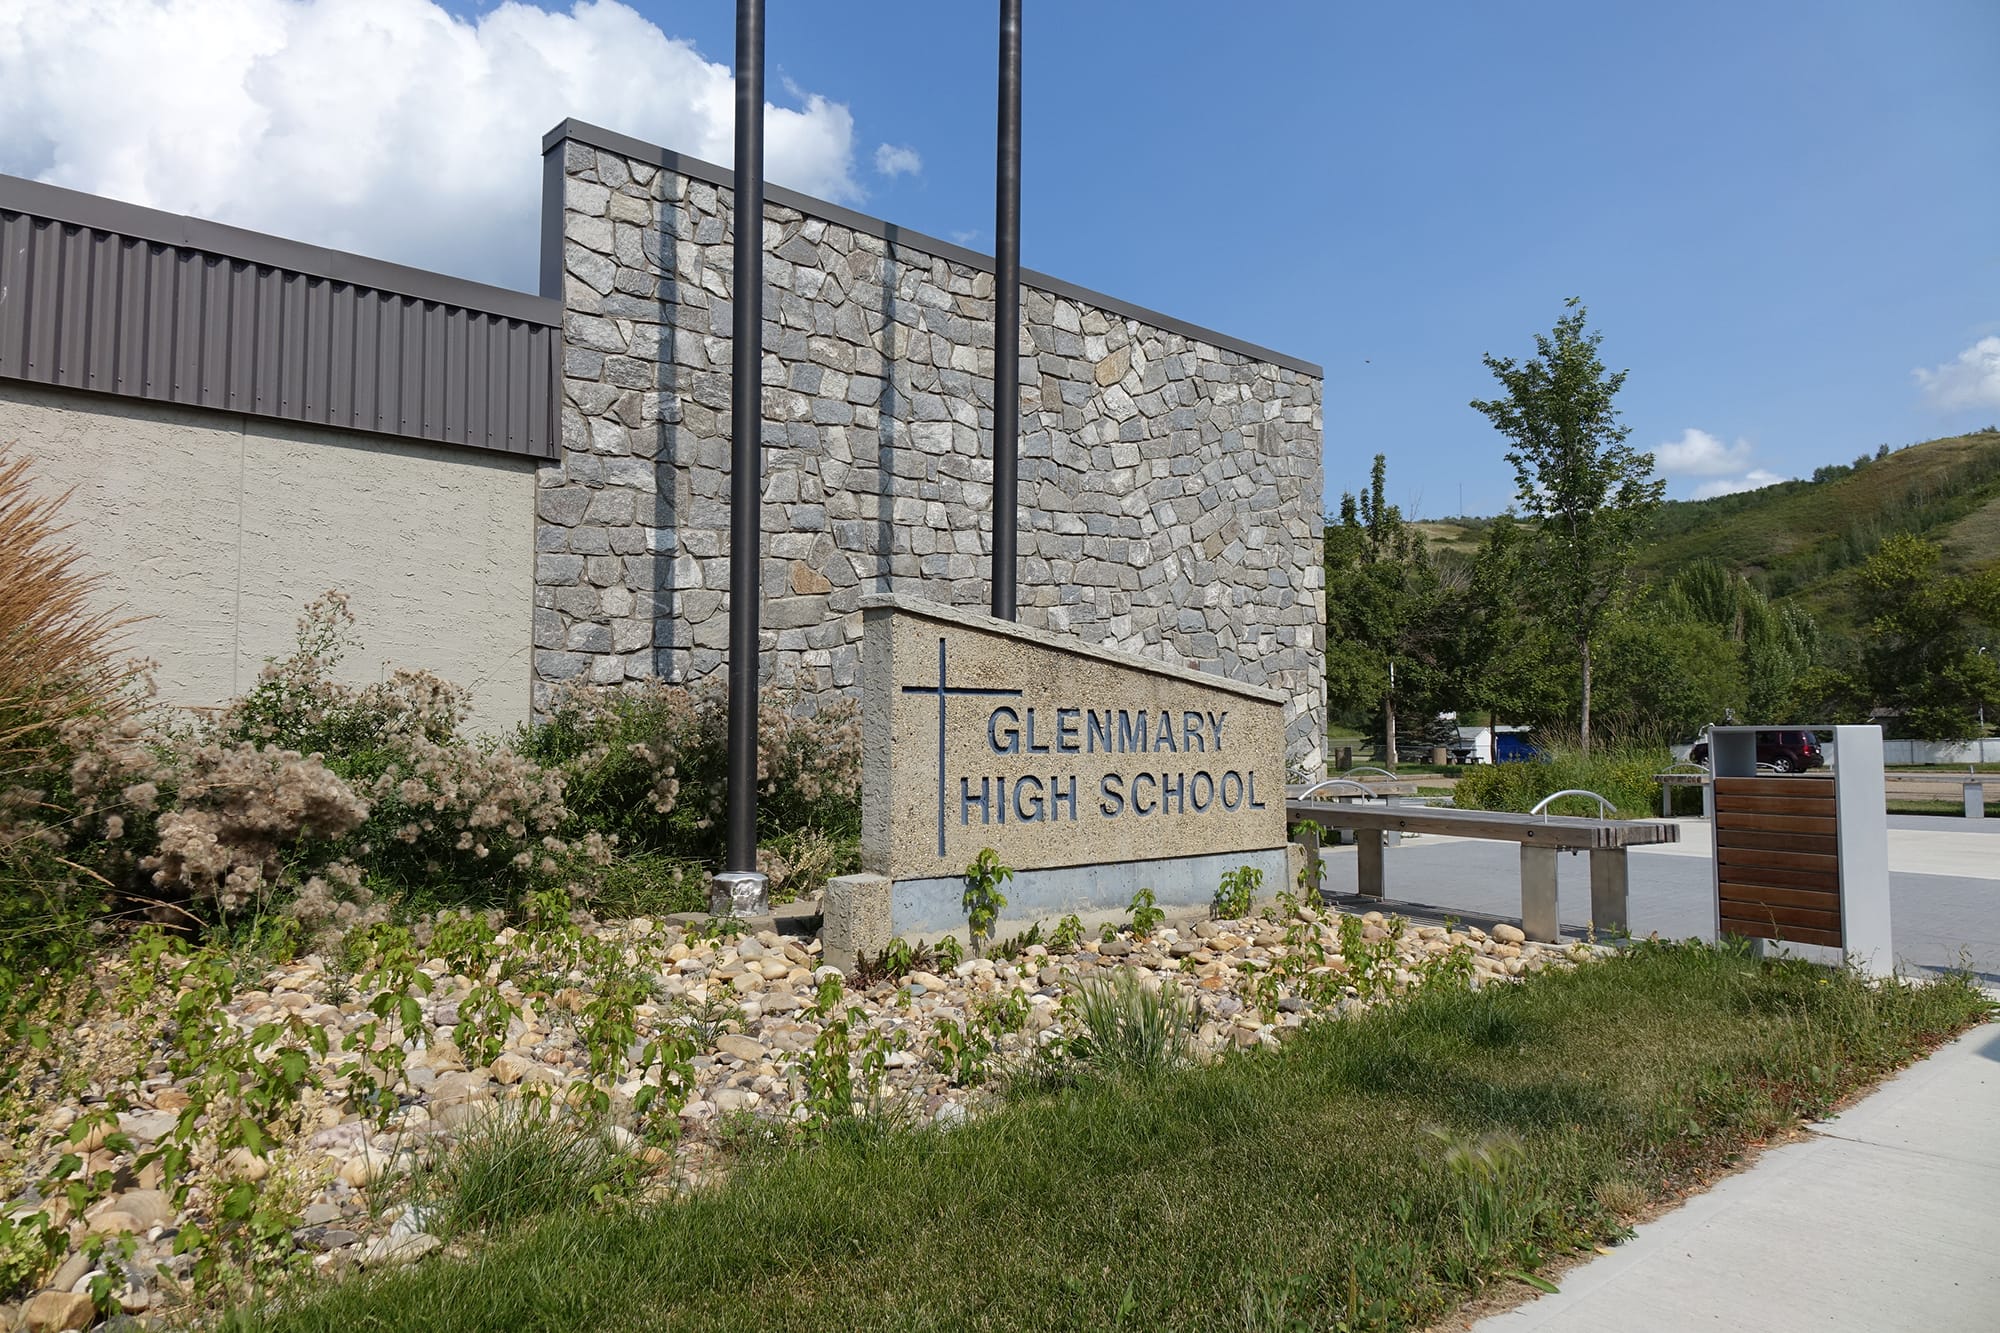 Glenmary School with signage